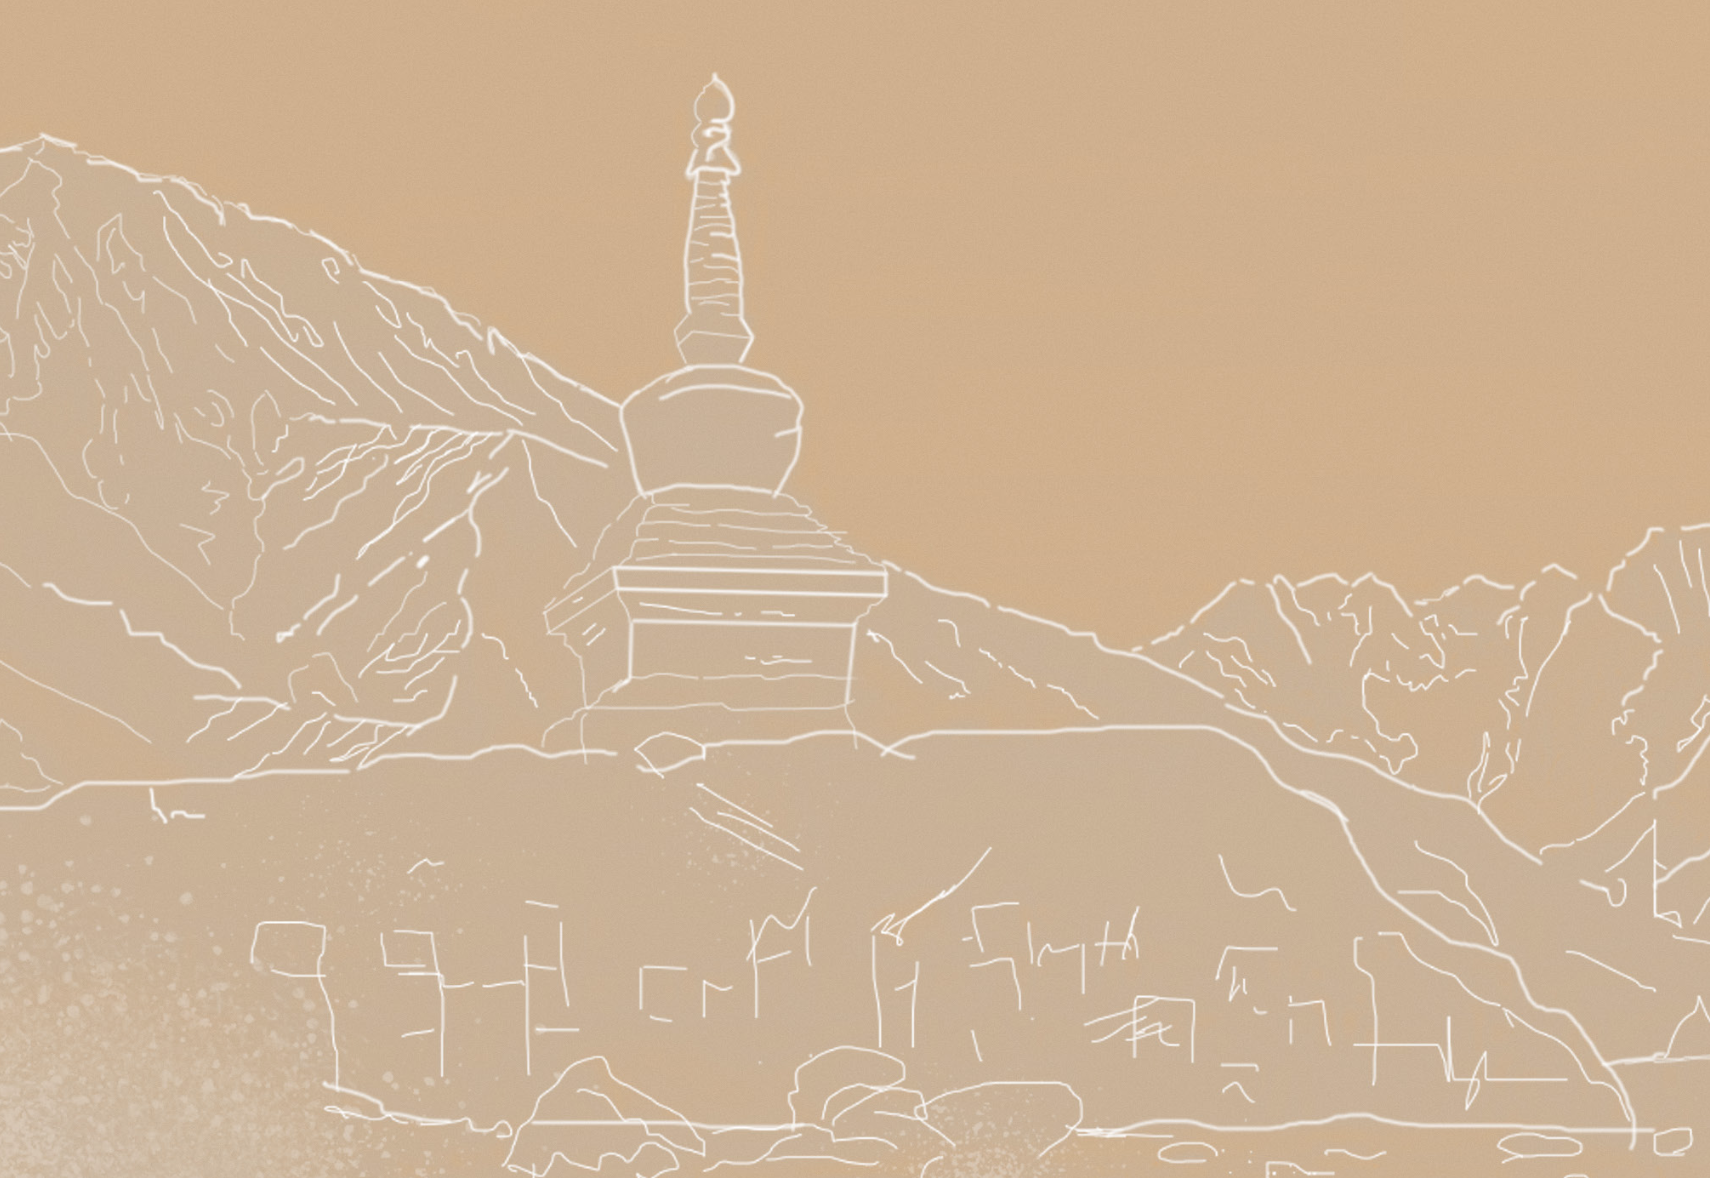 alt= Illustration of a buddhist stupa with mountainous background in a line drawing style on a sepia-toned backdrop.